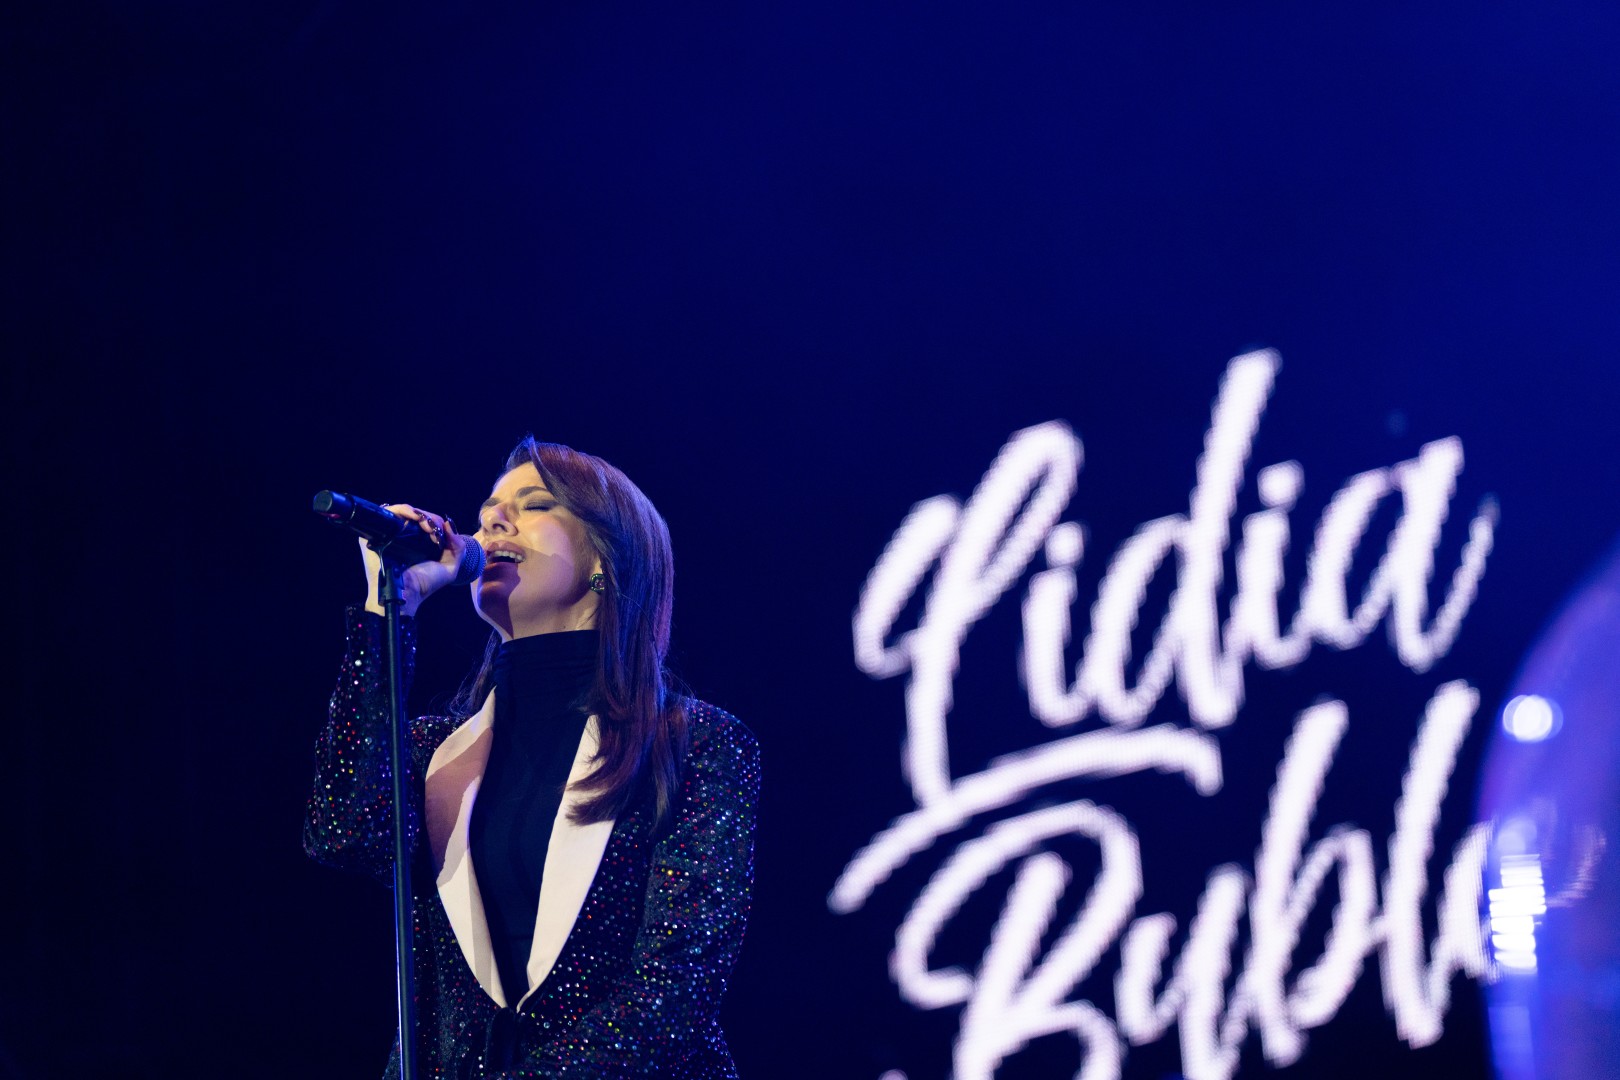 Lidia Buble at National Arena in Bucharest on March 12, 2022 (4c1ed69034)